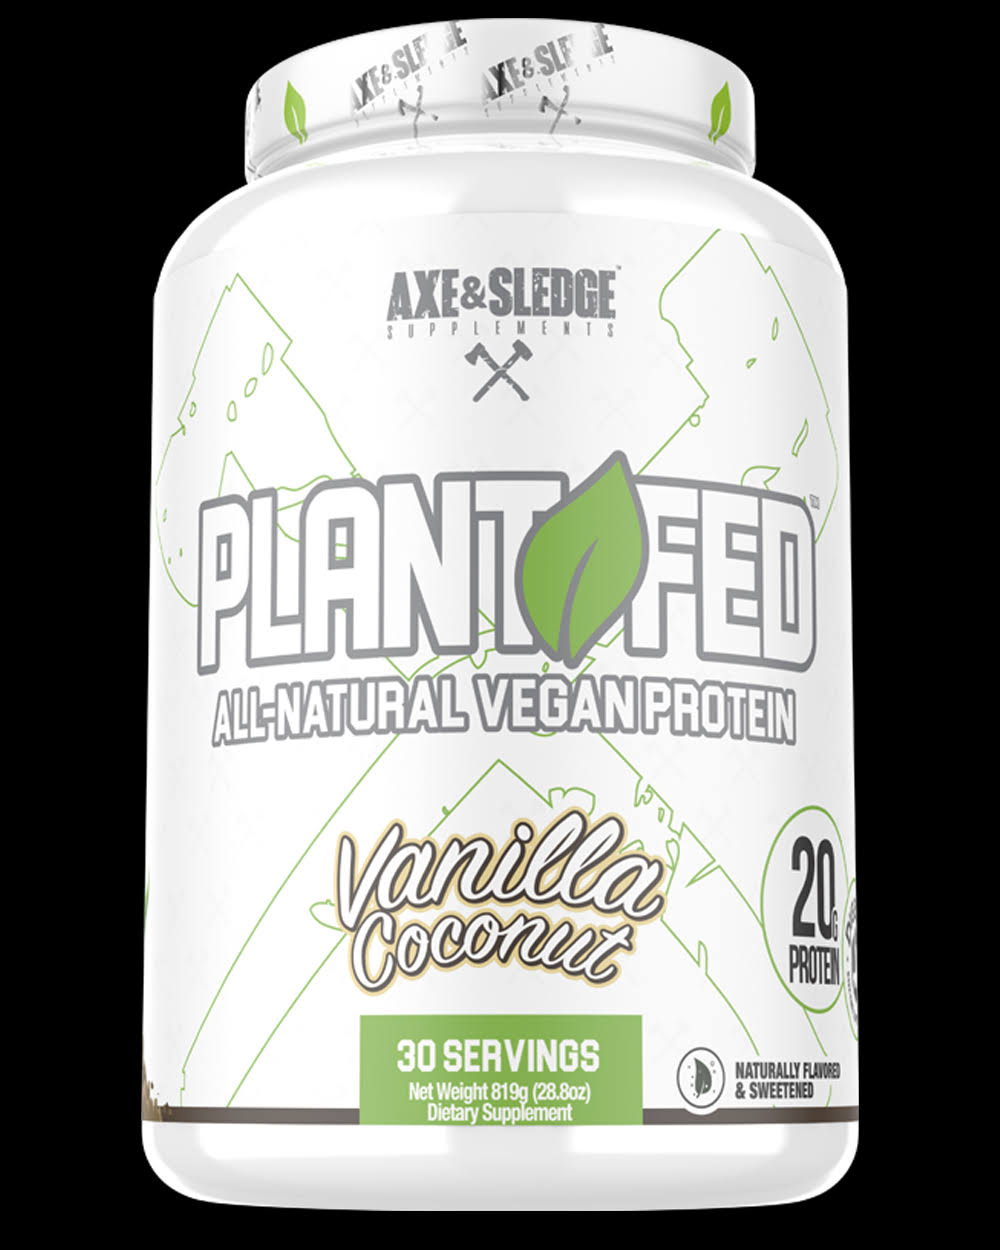 Axe & Sledge Plant Fed All-Natural Vegan Protein 30 Servings / Vanilla Coconut